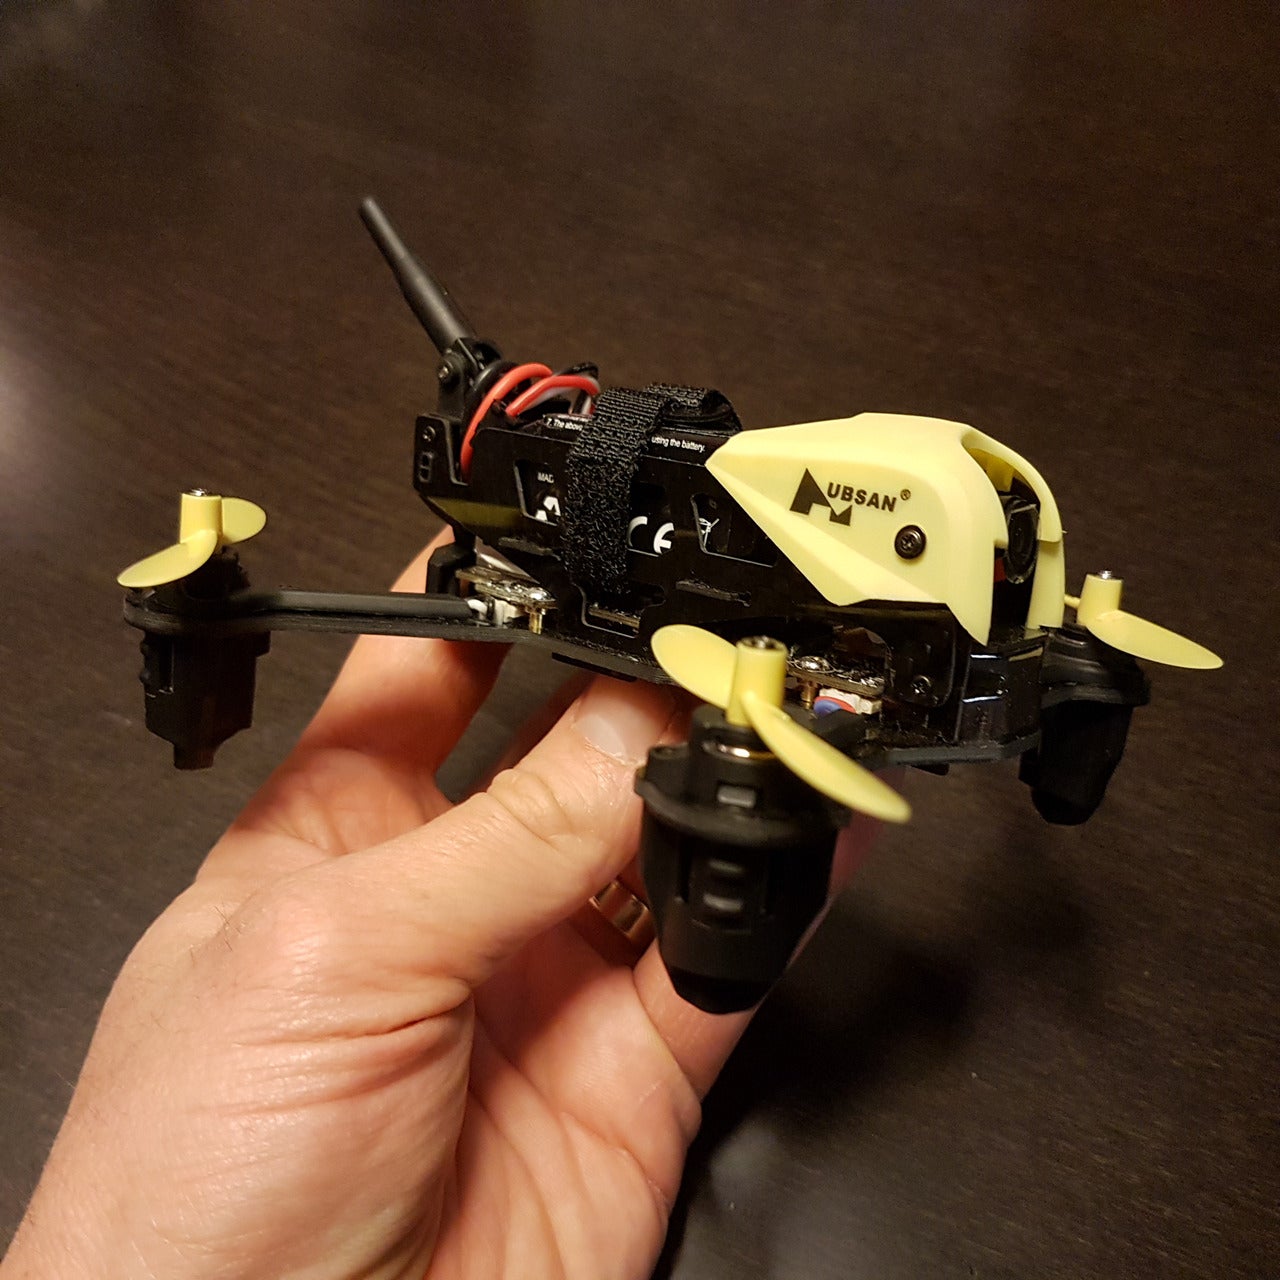 Night spot Secrete Triathlete Mini-Review Review of Hubsan H122D X4 STORM - Micro Racing Drone Quadcopter  w 5.8G FPV cam - RC Groups